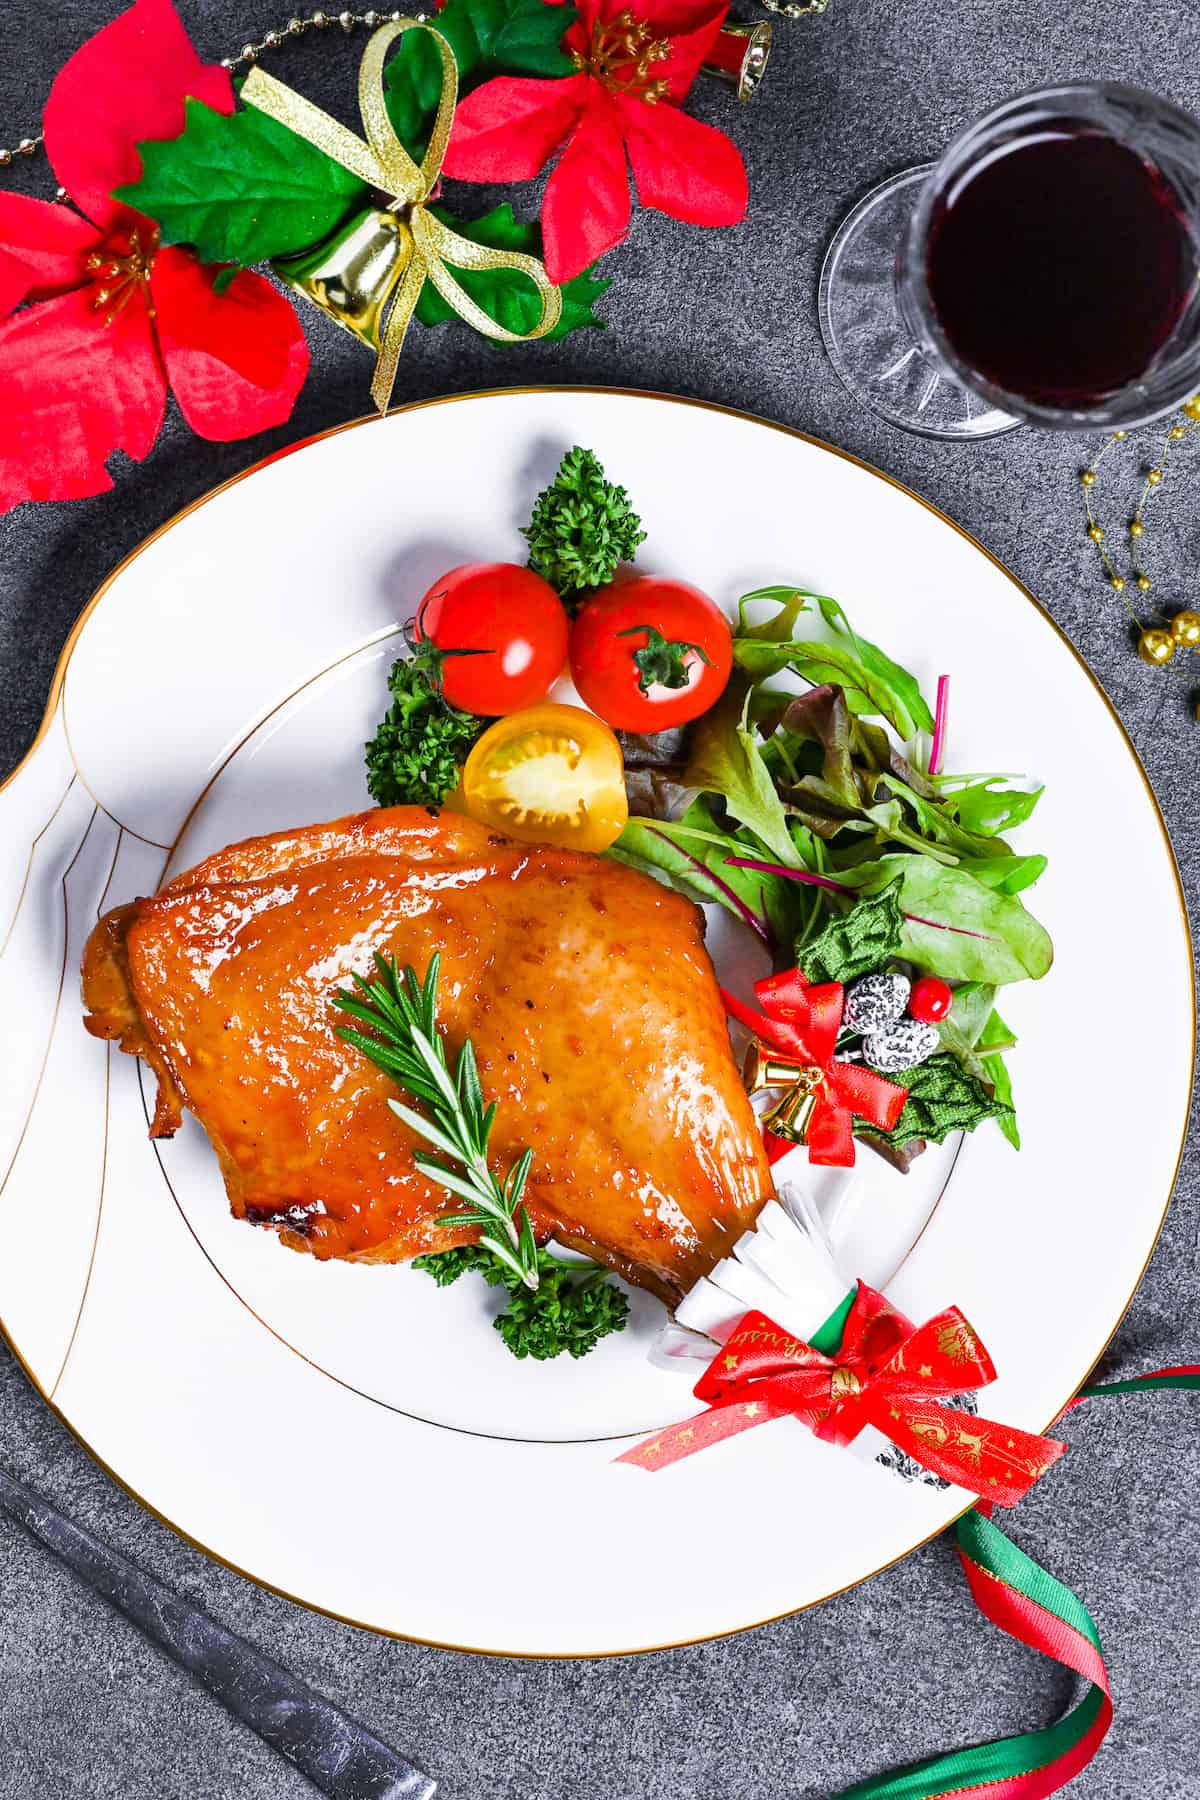 Japanese Christmas Chicken (Roasted Chicken with Soy and Yuzu Glaze) on a white plate topped with a sprig of fresh rosemary next to a simple side salad